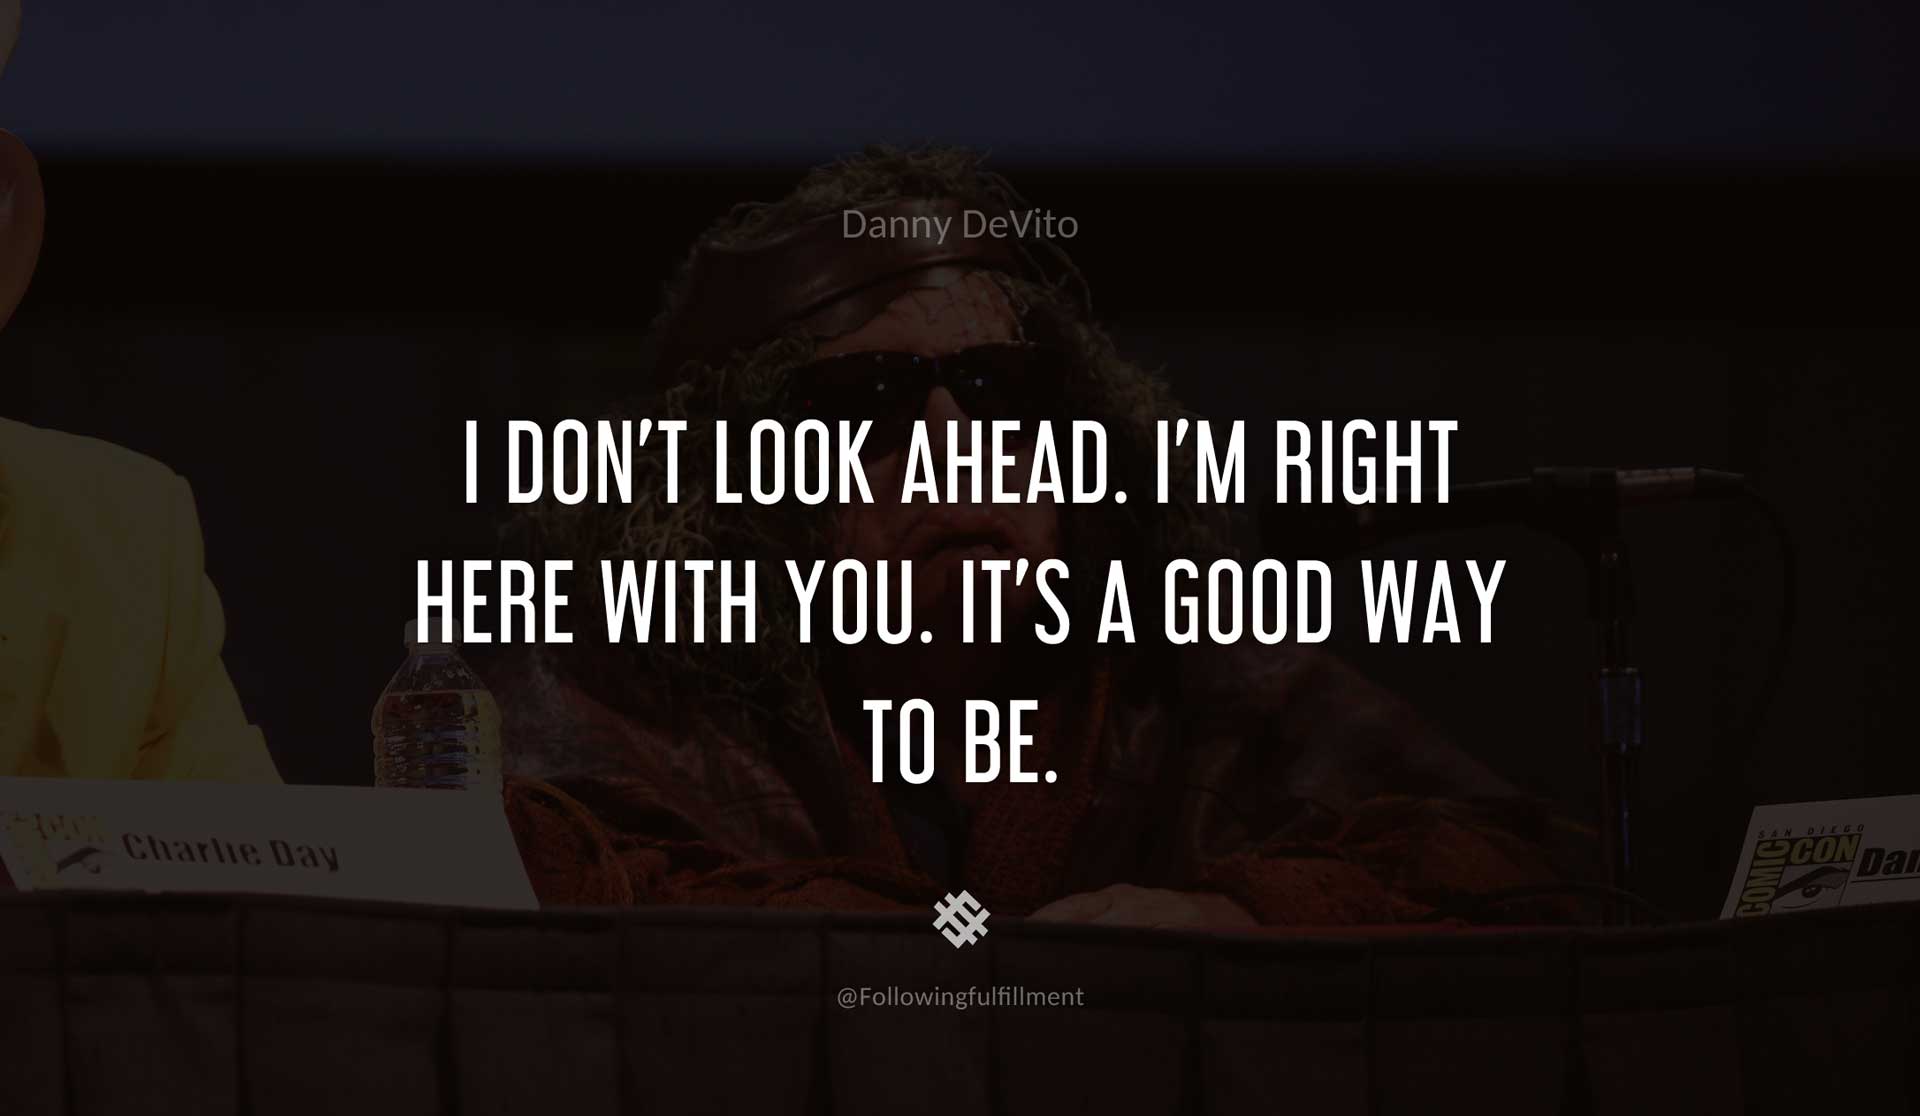 I-don't-look-ahead.-I'm-right-here-with-you.-It's-a-good-way-to-be.-DANNY-DEVITO-Quote.jpg